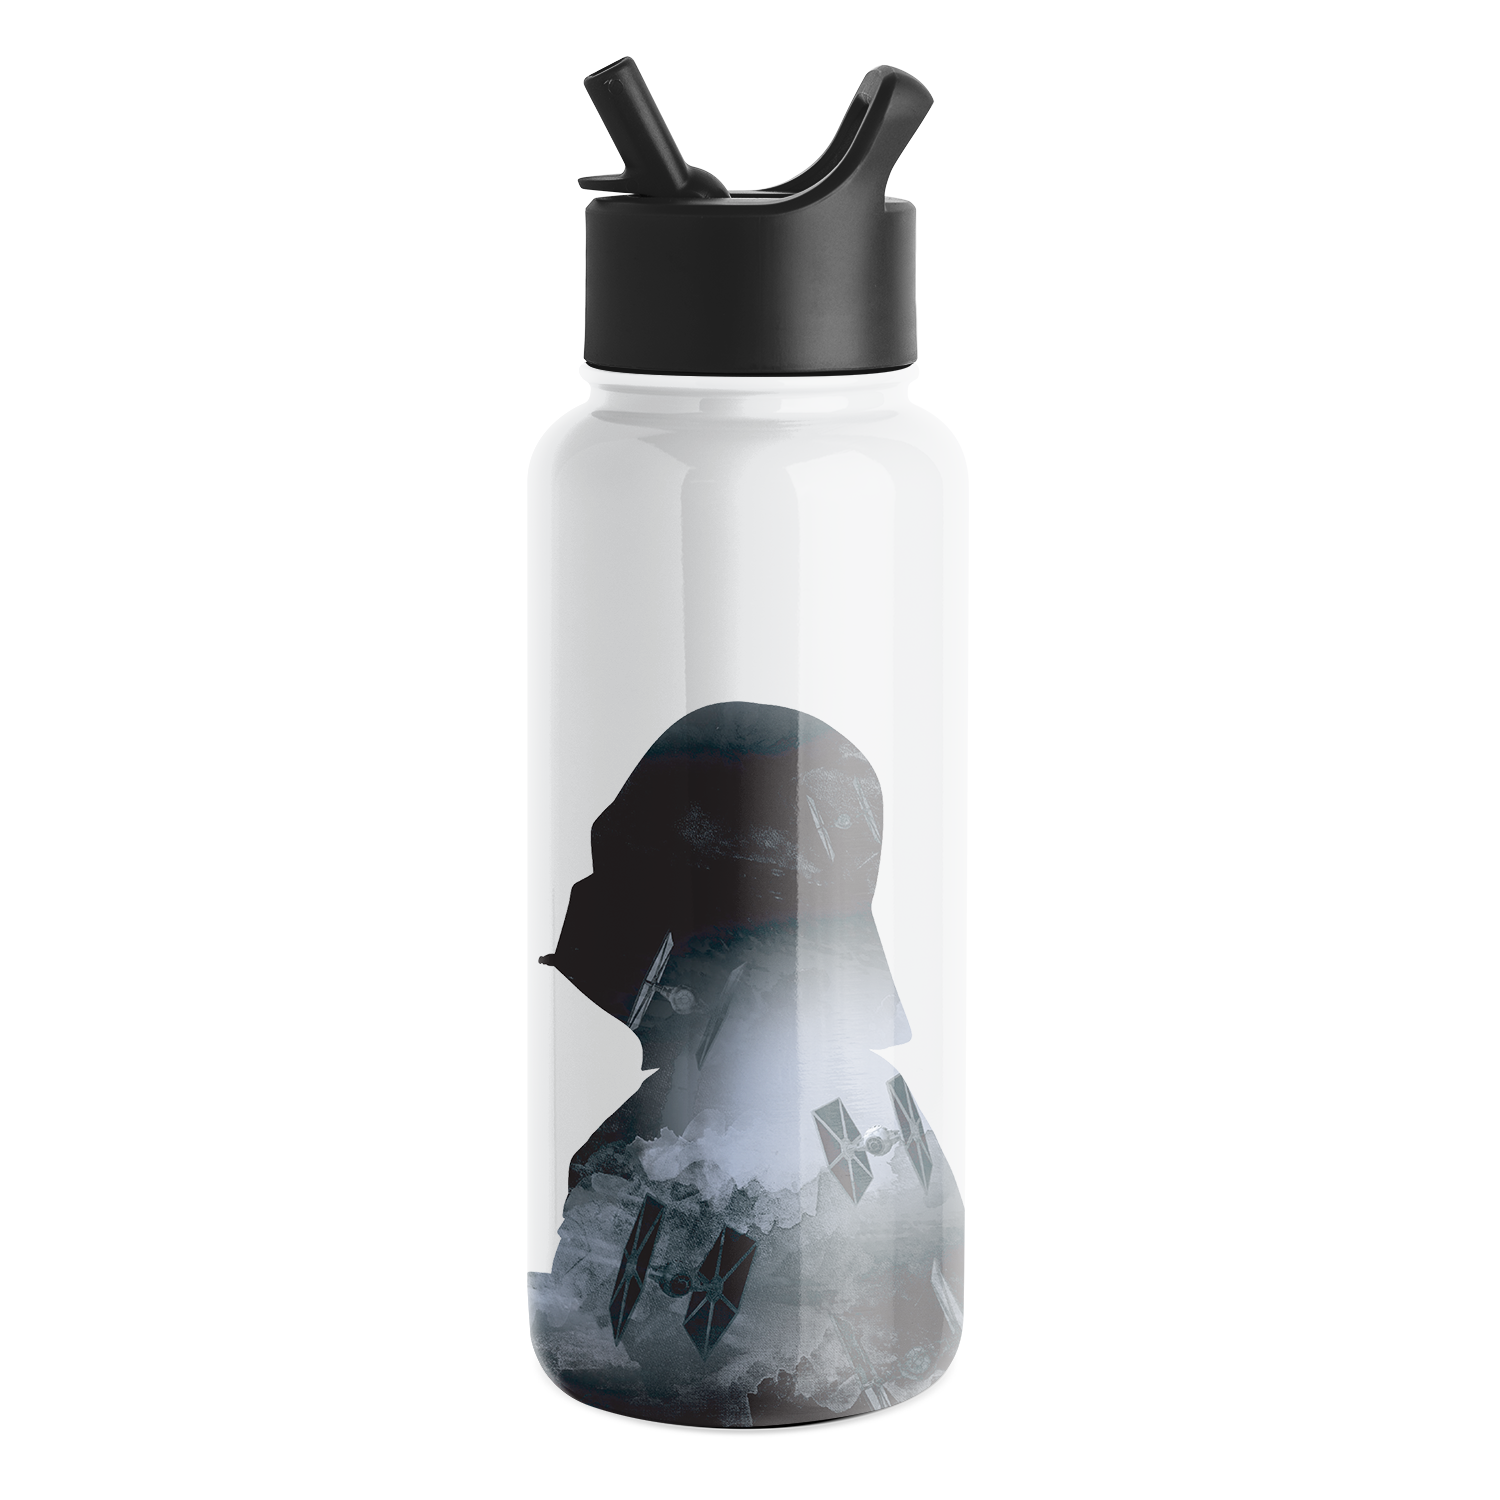 Simple Modern Star Wars Water Bottle, Reusable Cup with Straw Lid